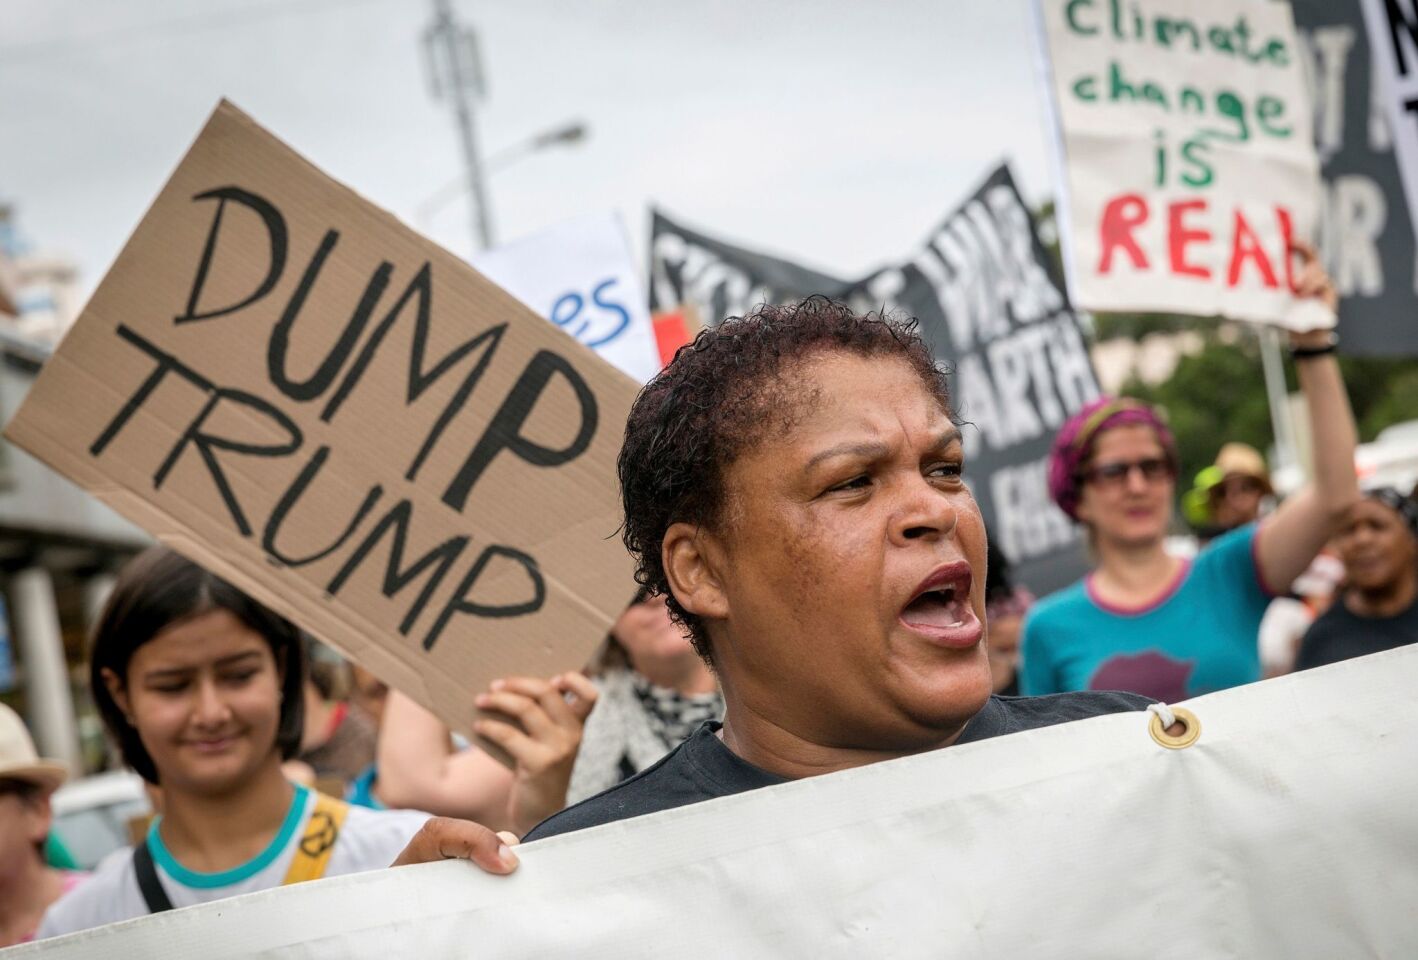 Marchers in Durban, South Africa, vent their wrath at Donald Trump, the new U.S. president.